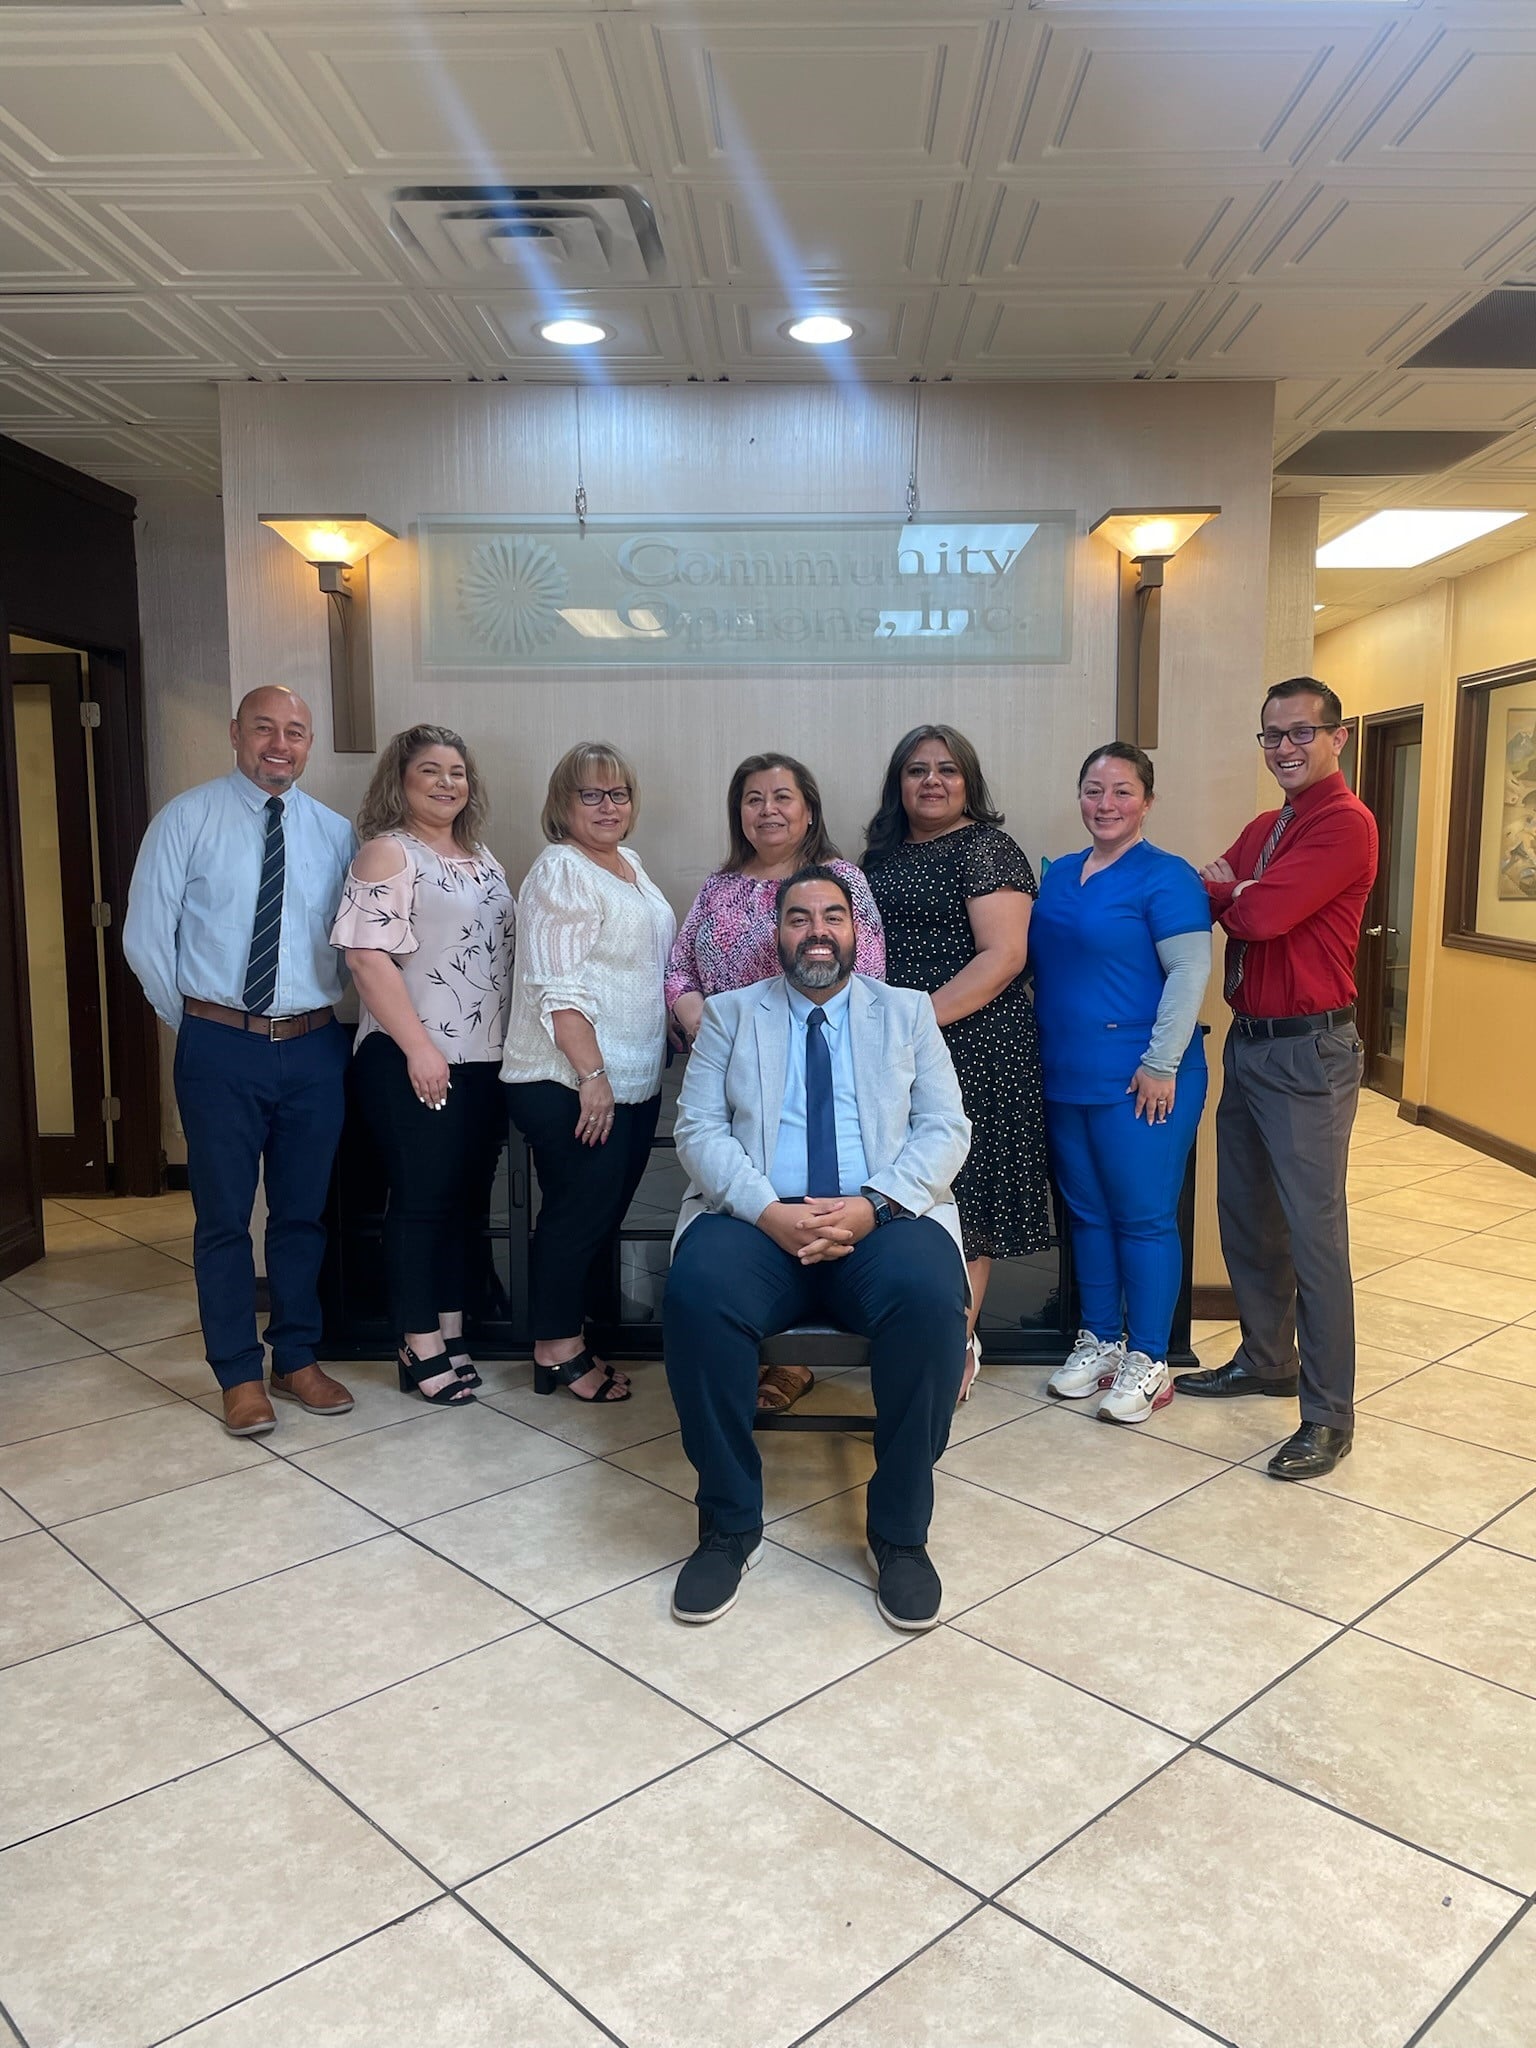 Community Options, Inc. of El Paso, TX was established in 1997 to provide residential and employment support services to individuals with disabilities in El Paso, Texas.